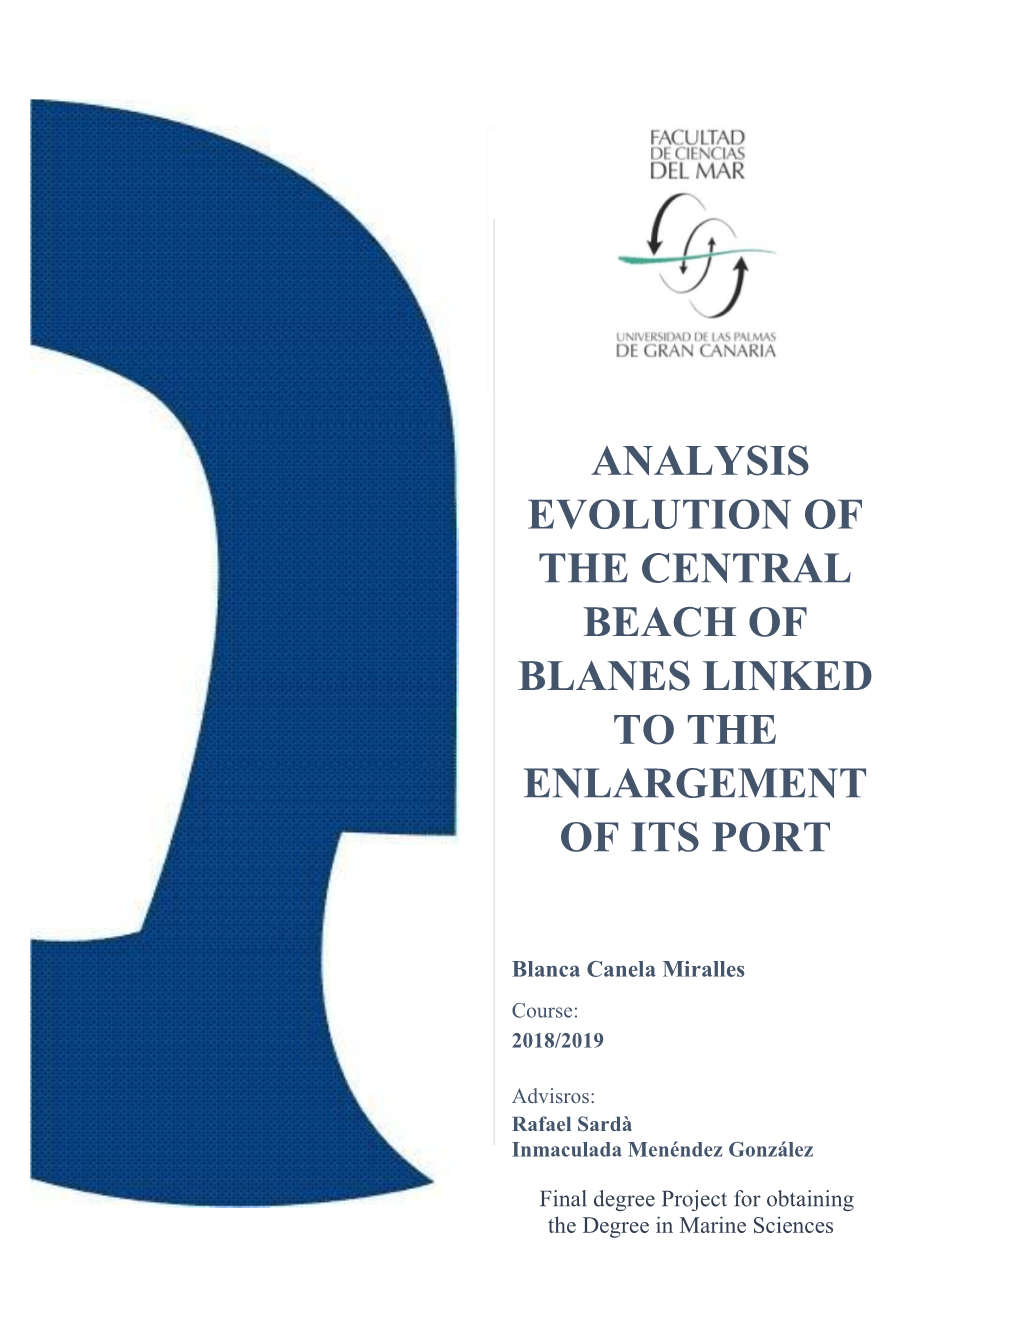 Analysis Evoltion of the Central Beach of Blanes Linked to the Enlargement of Its Port